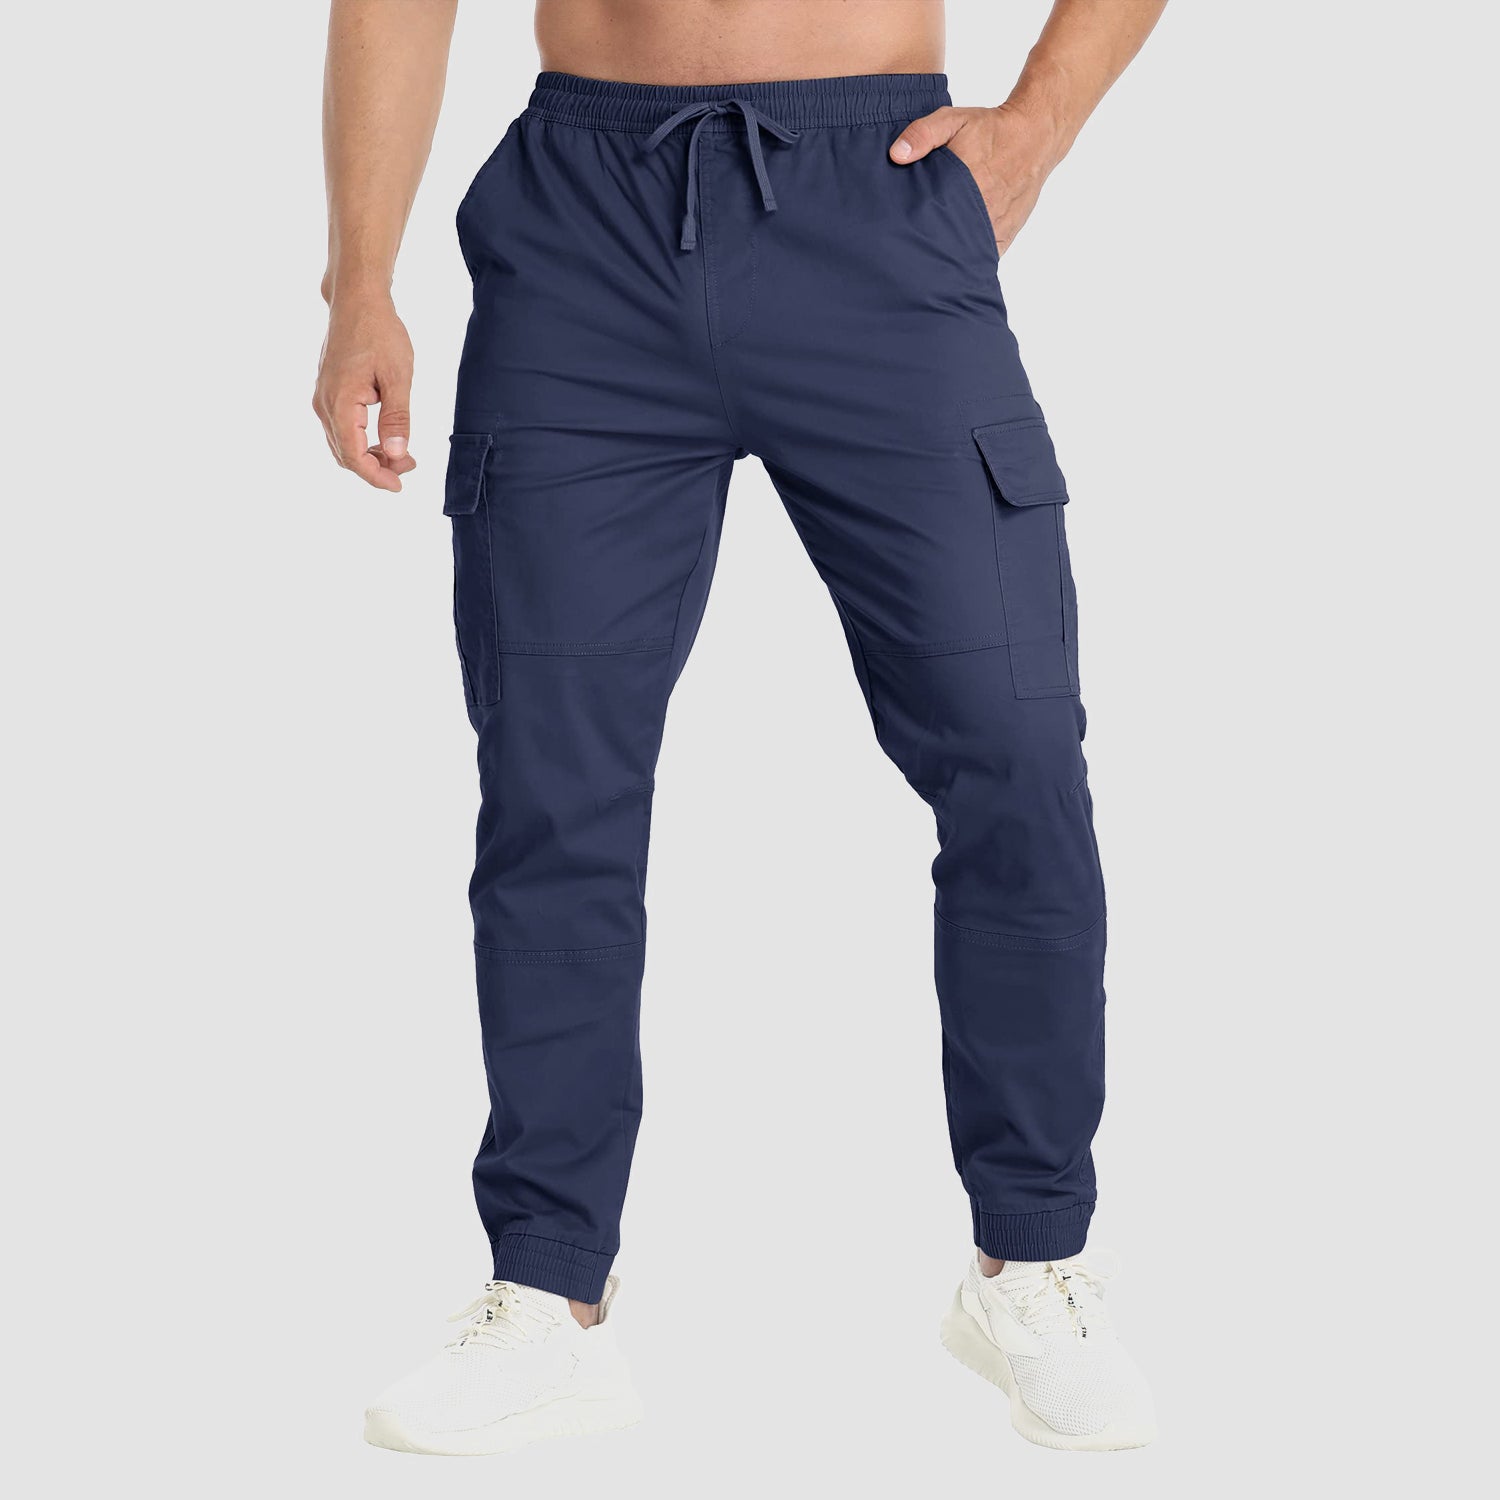 https://magcomsen.com/cdn/shop/products/Men_s-Cargo-Pants-Elastic-Waist-Hiking-Ripstop-Outdoor-Casual-Fishing-Pant-with-5-Pockets_2.jpg?v=1662436181&width=1500